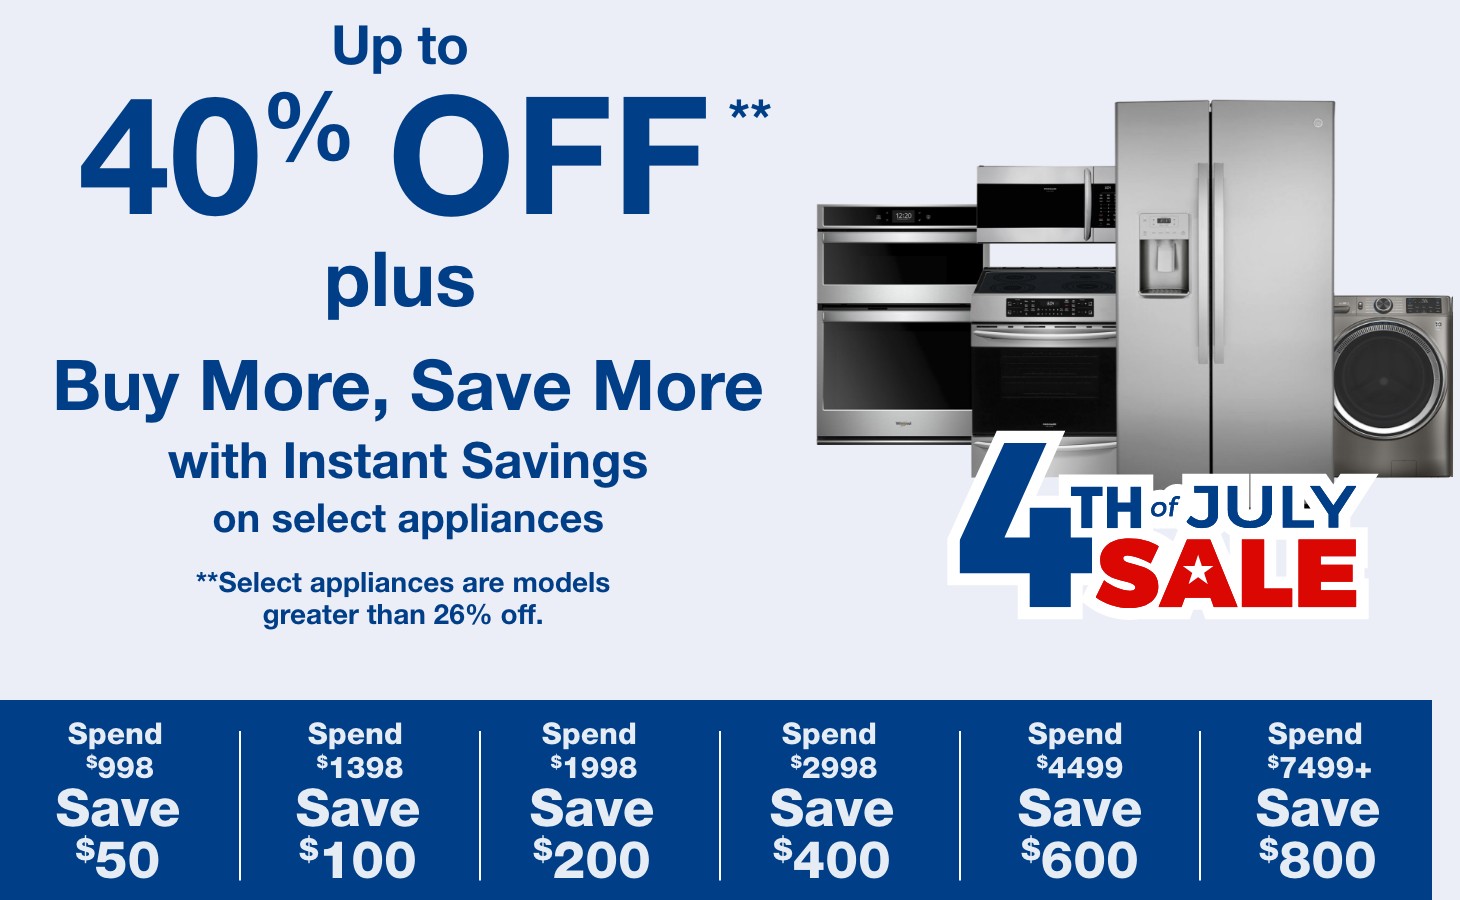 Up to 40% off** plus buy more, save more with instant savings on select appliances ** select appliances are models greater than 26% off.  Spend $998 save $50, spend $1398 save $100, spend $1998 save $200, spend $2998 save $400, spend $4499 save $600 spend $7499 save $800